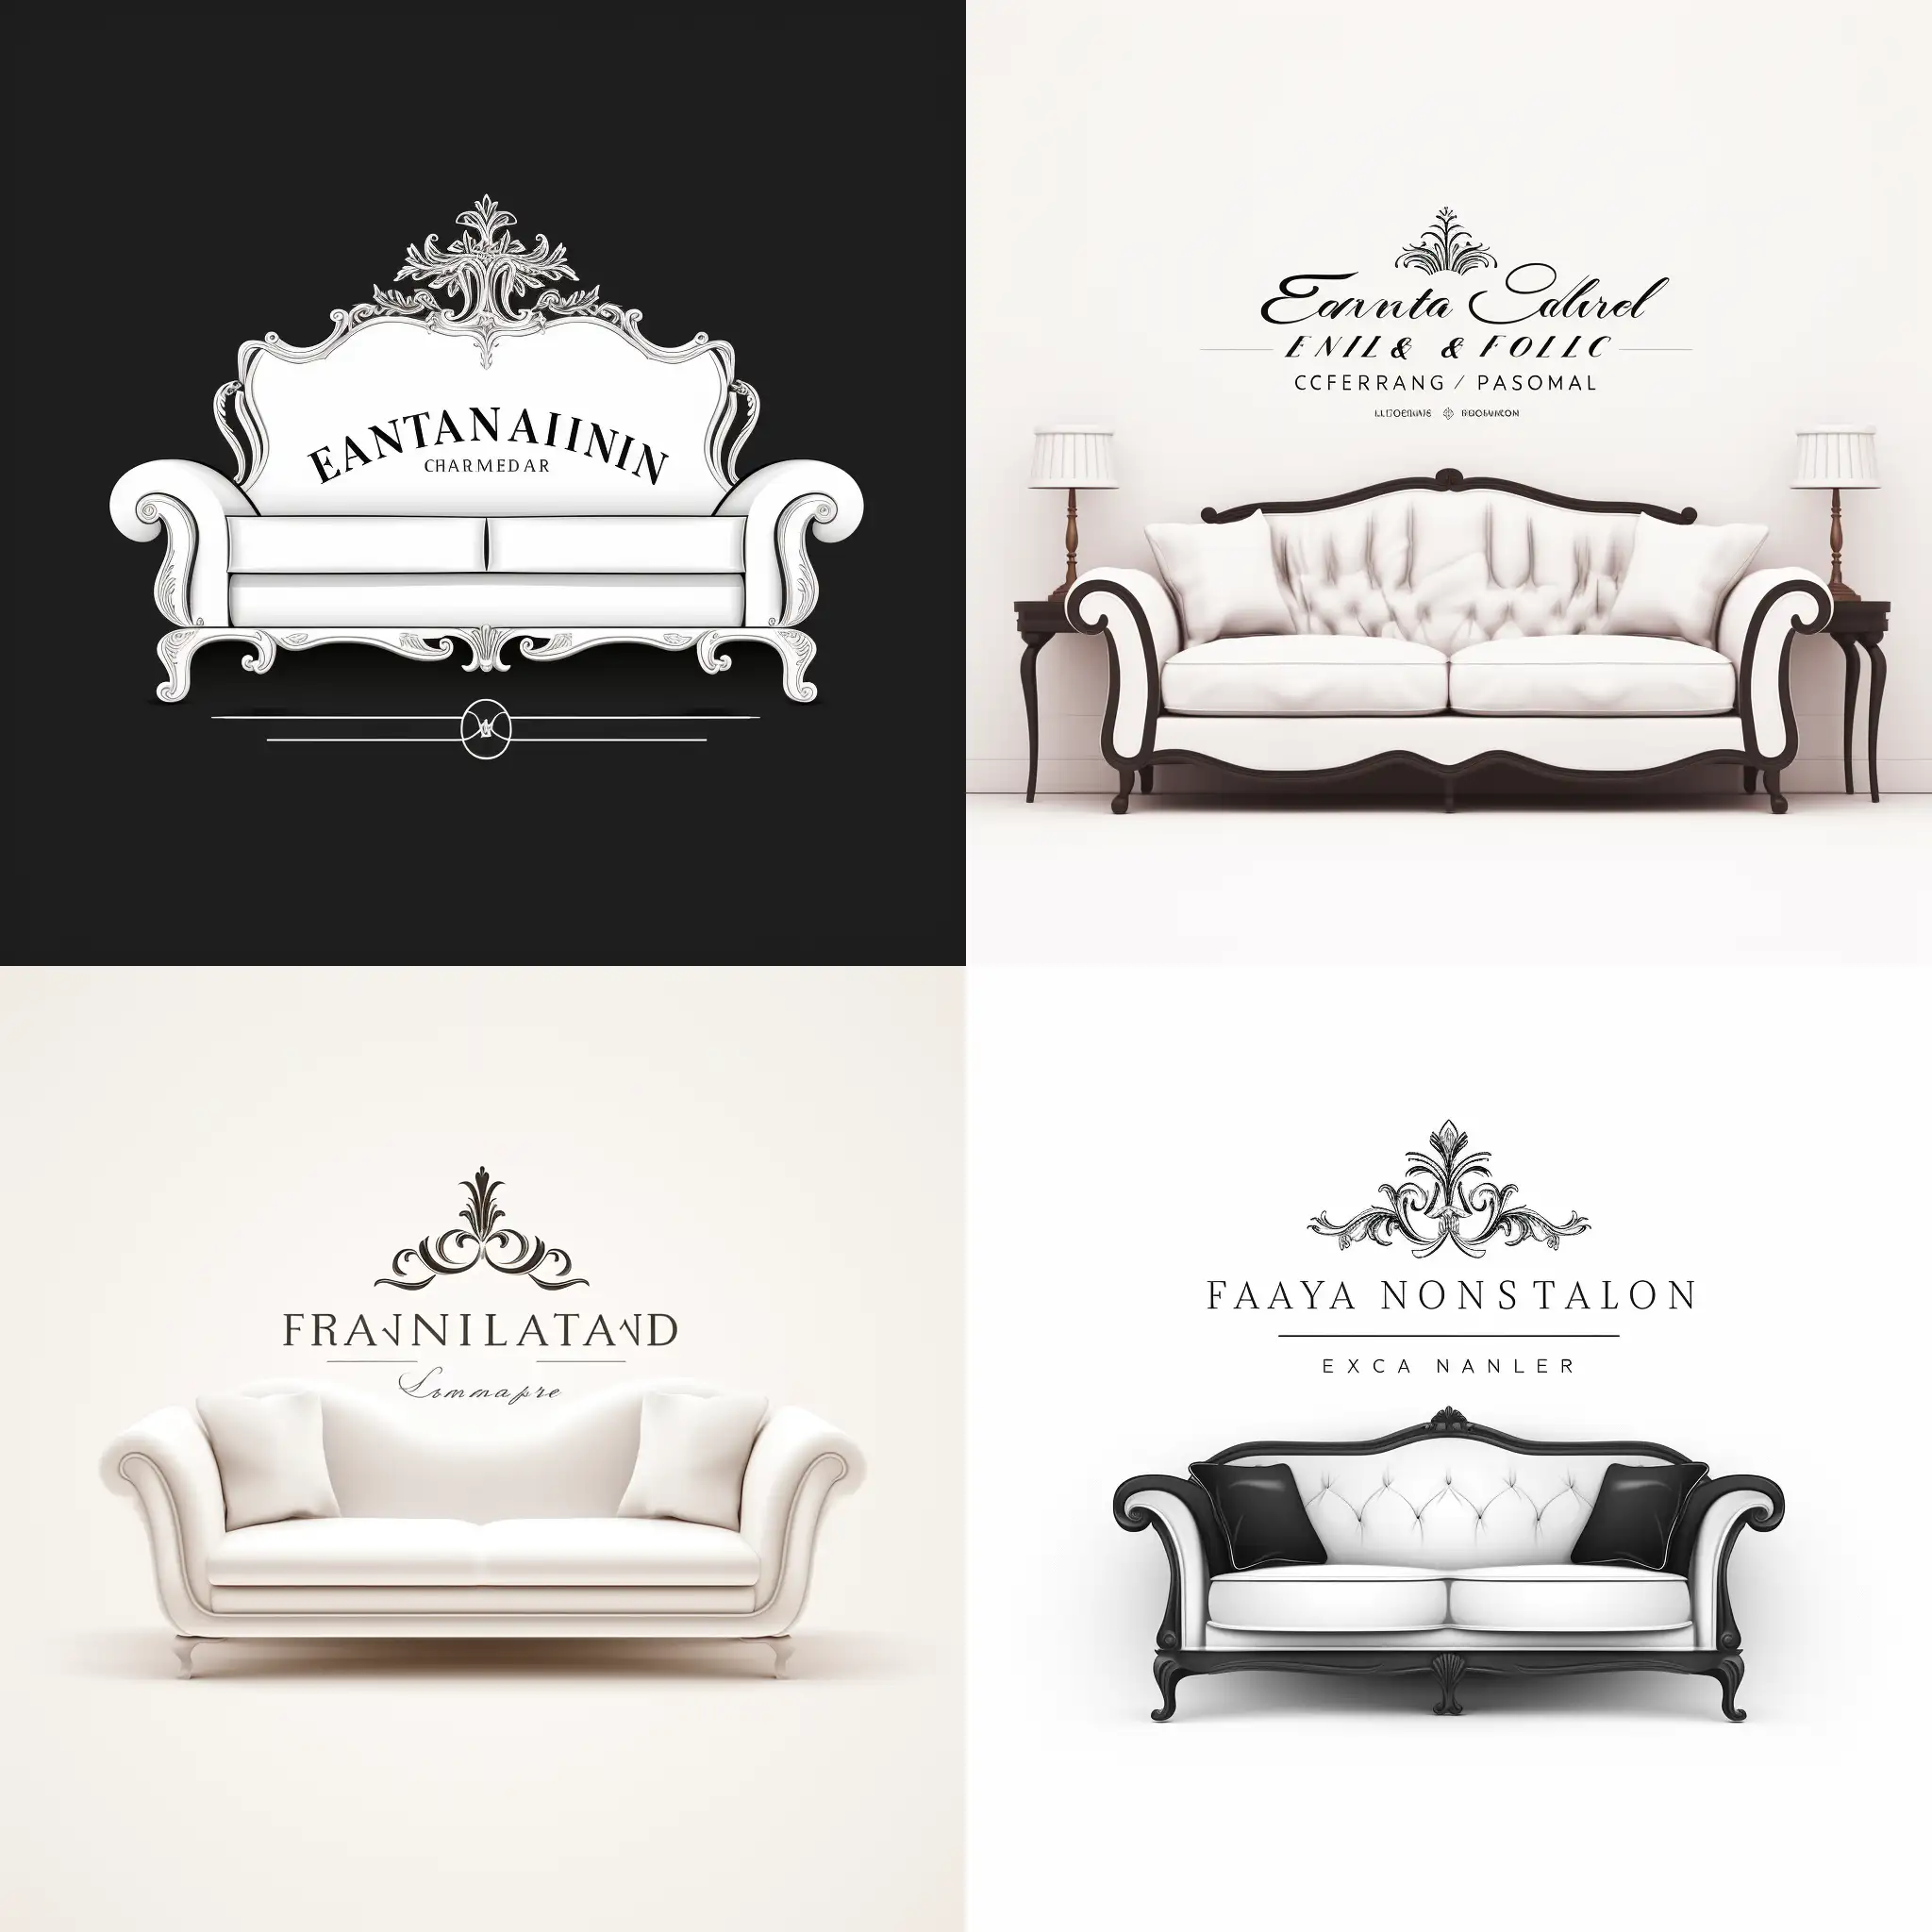 European-Style-Cleaning-Services-by-SOFA-Black-and-White-Logo-Design